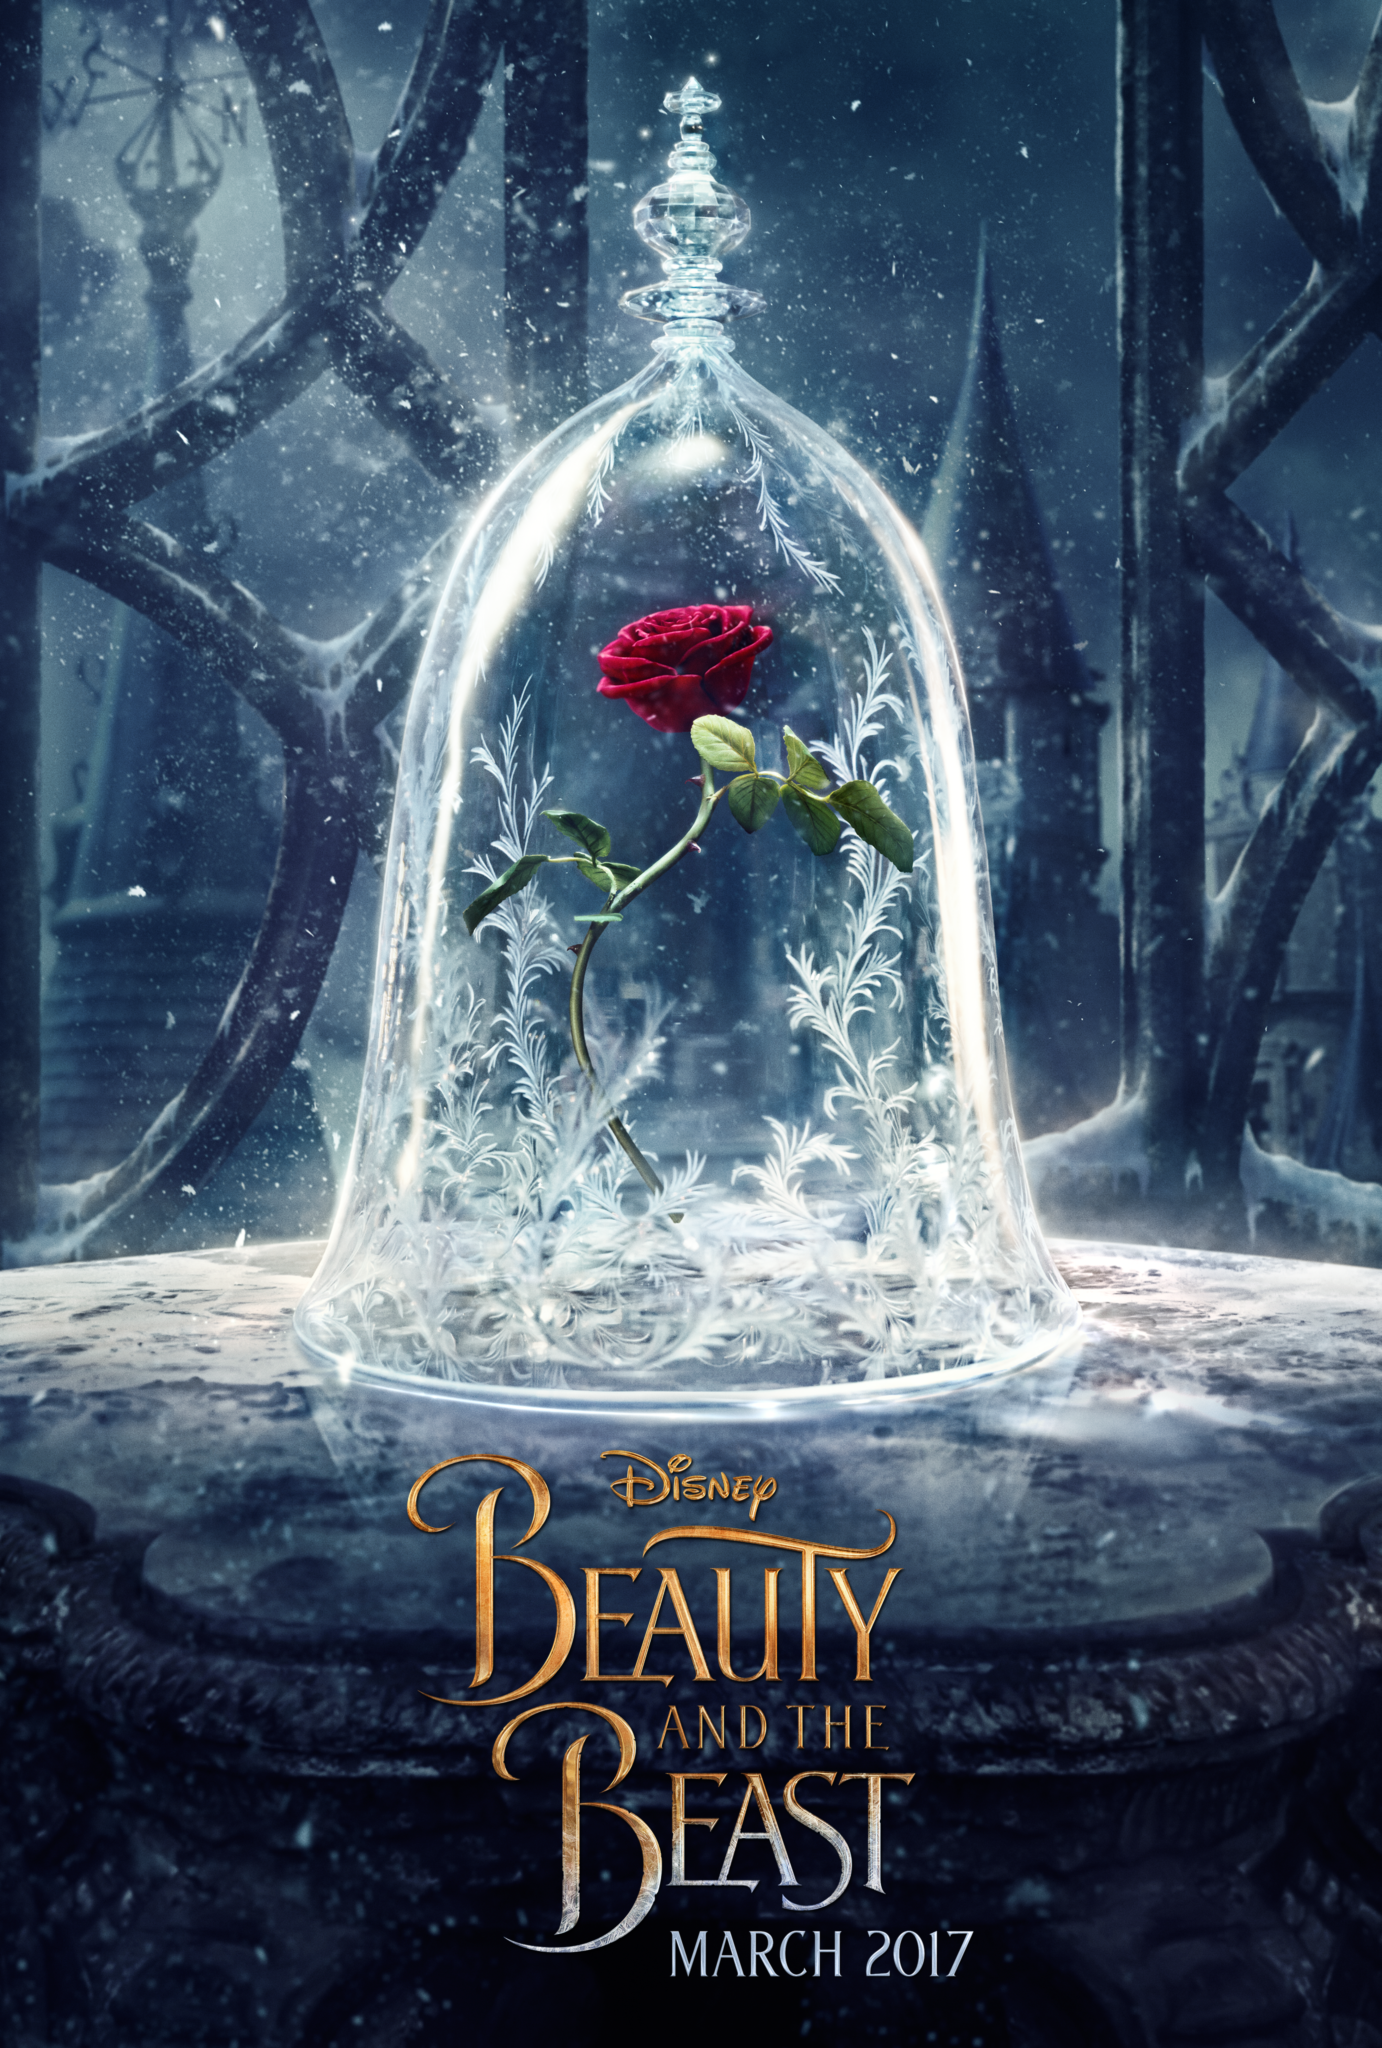 Beauty and the Beast Teaser Poster Released